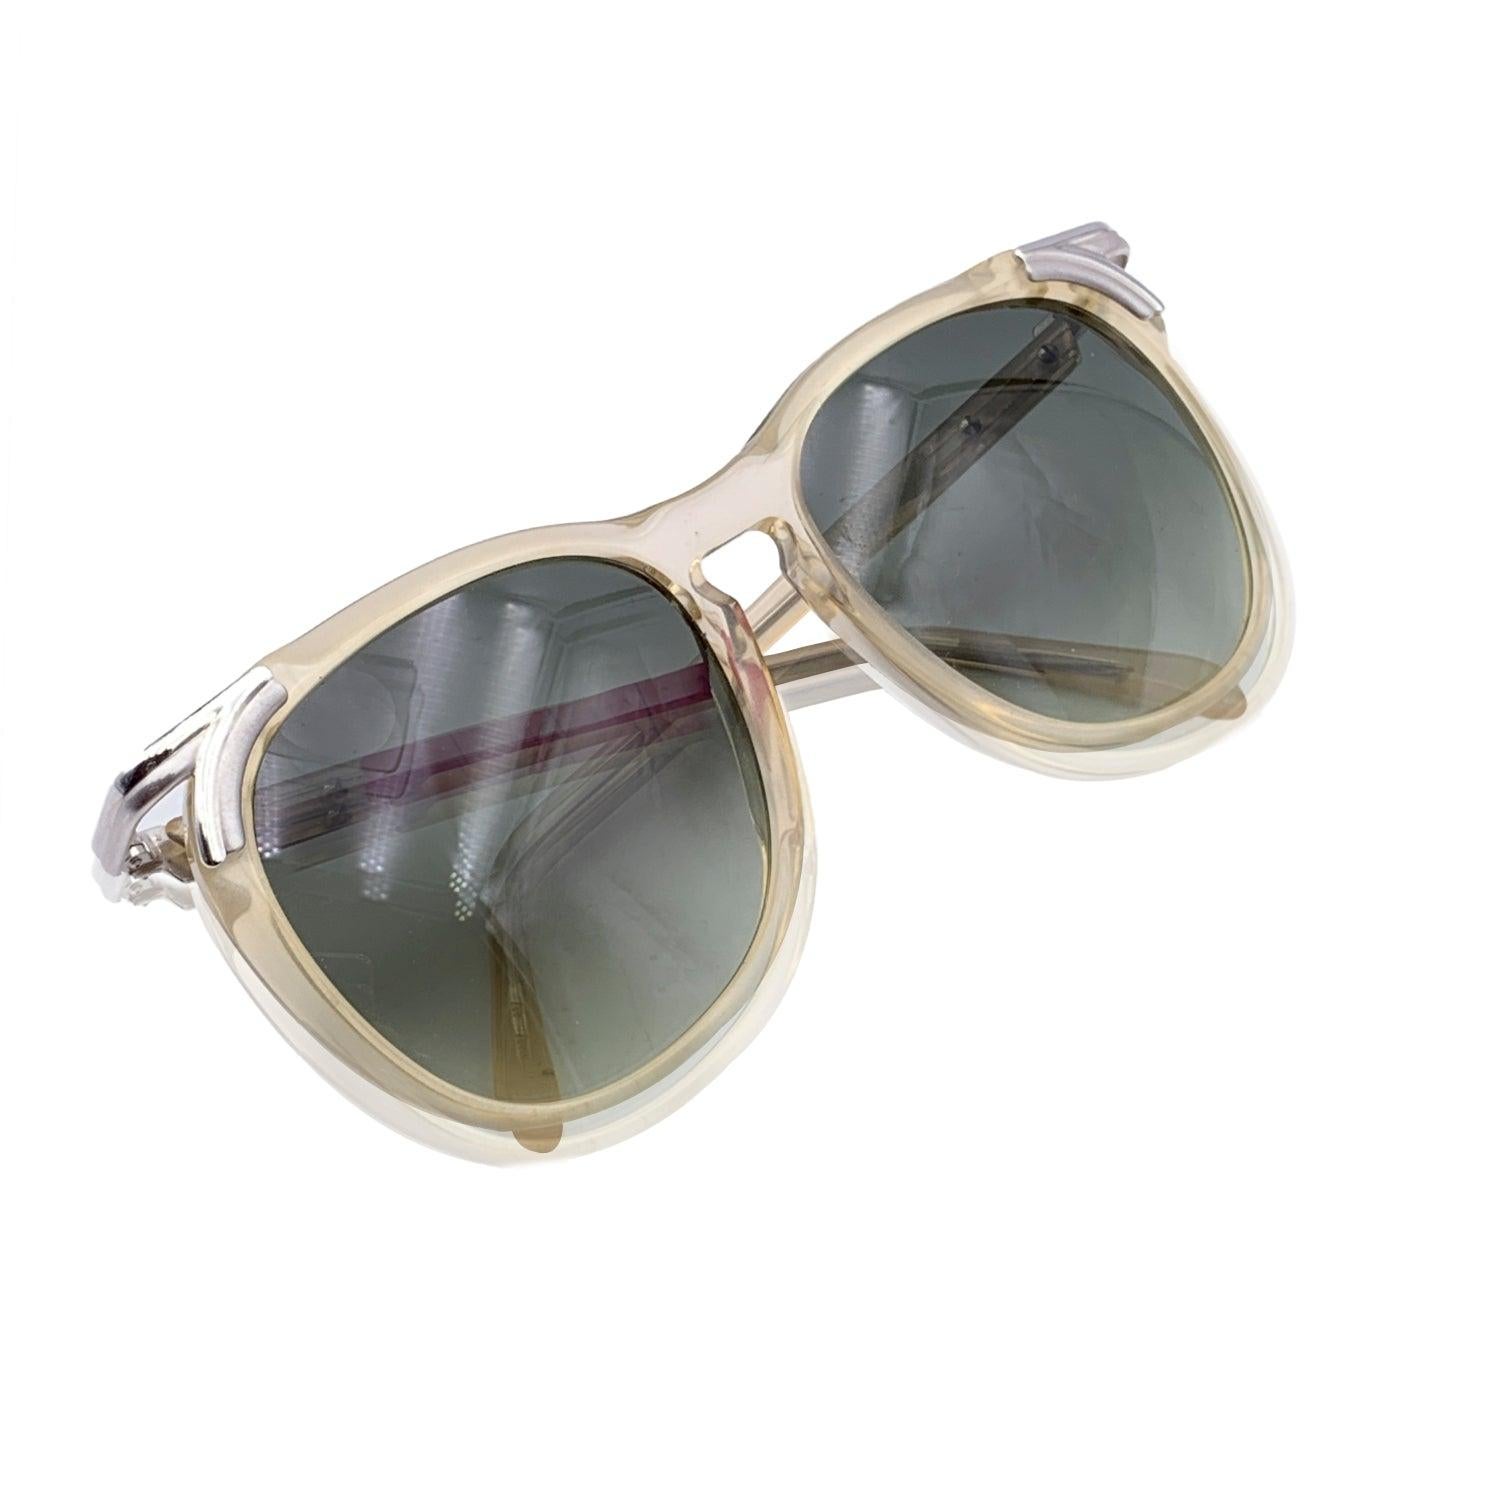 Cazal Vintage Clear Beige Sunglasses Mod. 113 Col. 82 54/16 135mm In Excellent Condition For Sale In Rome, Rome